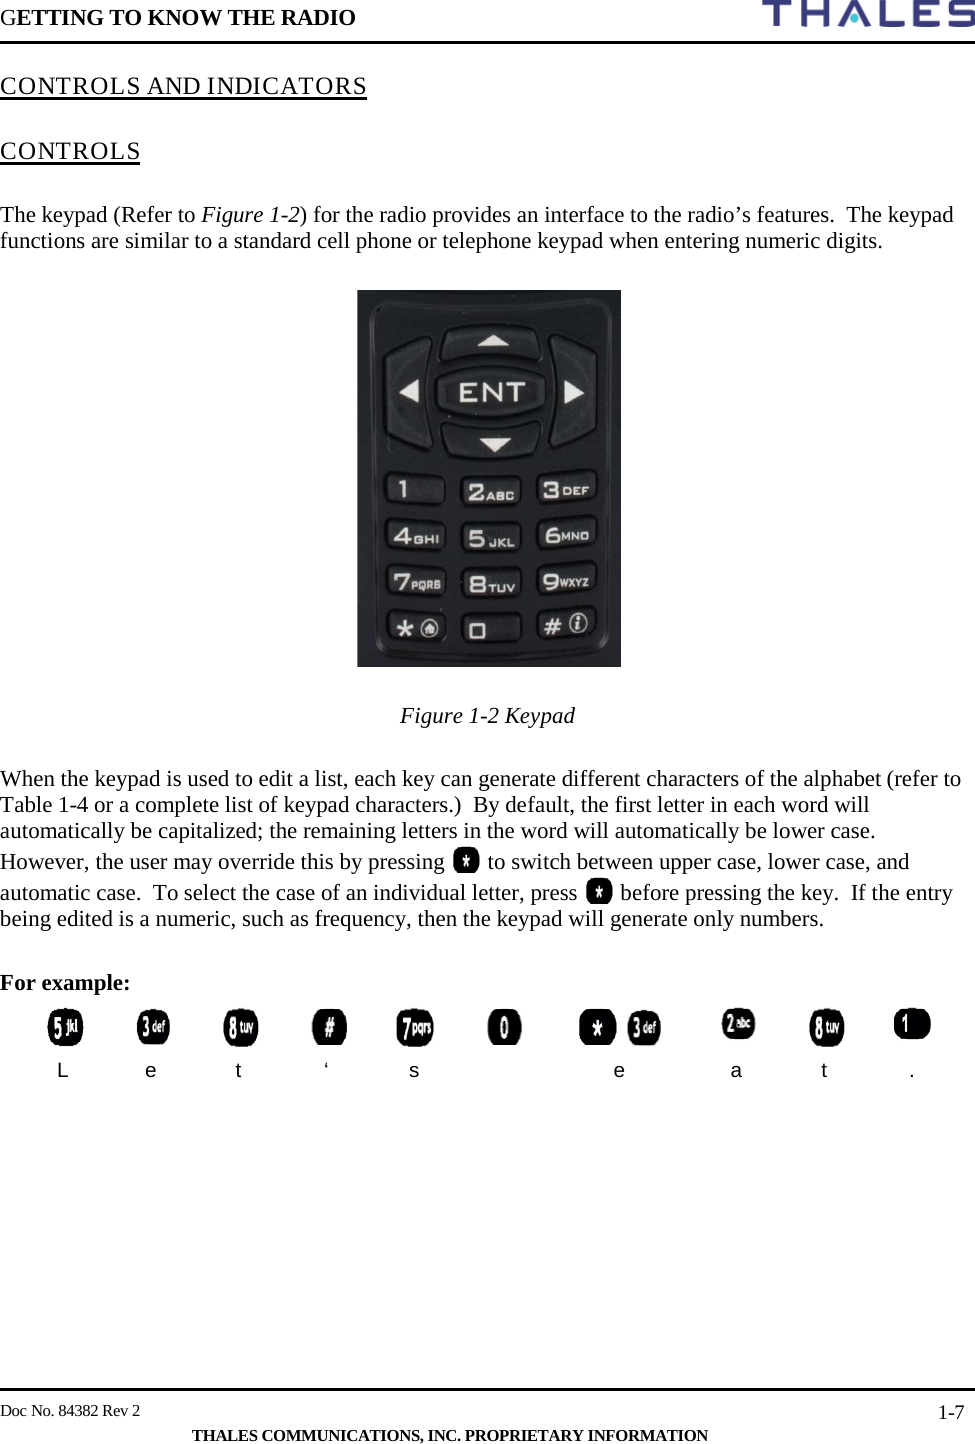 GETTING TO KNOW THE RADIO        Doc No. 84382 Rev 2     THALES COMMUNICATIONS, INC. PROPRIETARY INFORMATION 1-7 CONTROLS AND INDICATORS   CONTROLS  The keypad (Refer to Figure 1-2) for the radio provides an interface to the radio’s features.  The keypad functions are similar to a standard cell phone or telephone keypad when entering numeric digits.    Figure 1-2 Keypad   When the keypad is used to edit a list, each key can generate different characters of the alphabet (refer to Table 1-4 or a complete list of keypad characters.)  By default, the first letter in each word will automatically be capitalized; the remaining letters in the word will automatically be lower case.  However, the user may override this by pressing   to switch between upper case, lower case, and automatic case.  To select the case of an individual letter, press   before pressing the key.  If the entry being edited is a numeric, such as frequency, then the keypad will generate only numbers.  For example:             L  e  t  ‘  s    e  a  t  .     